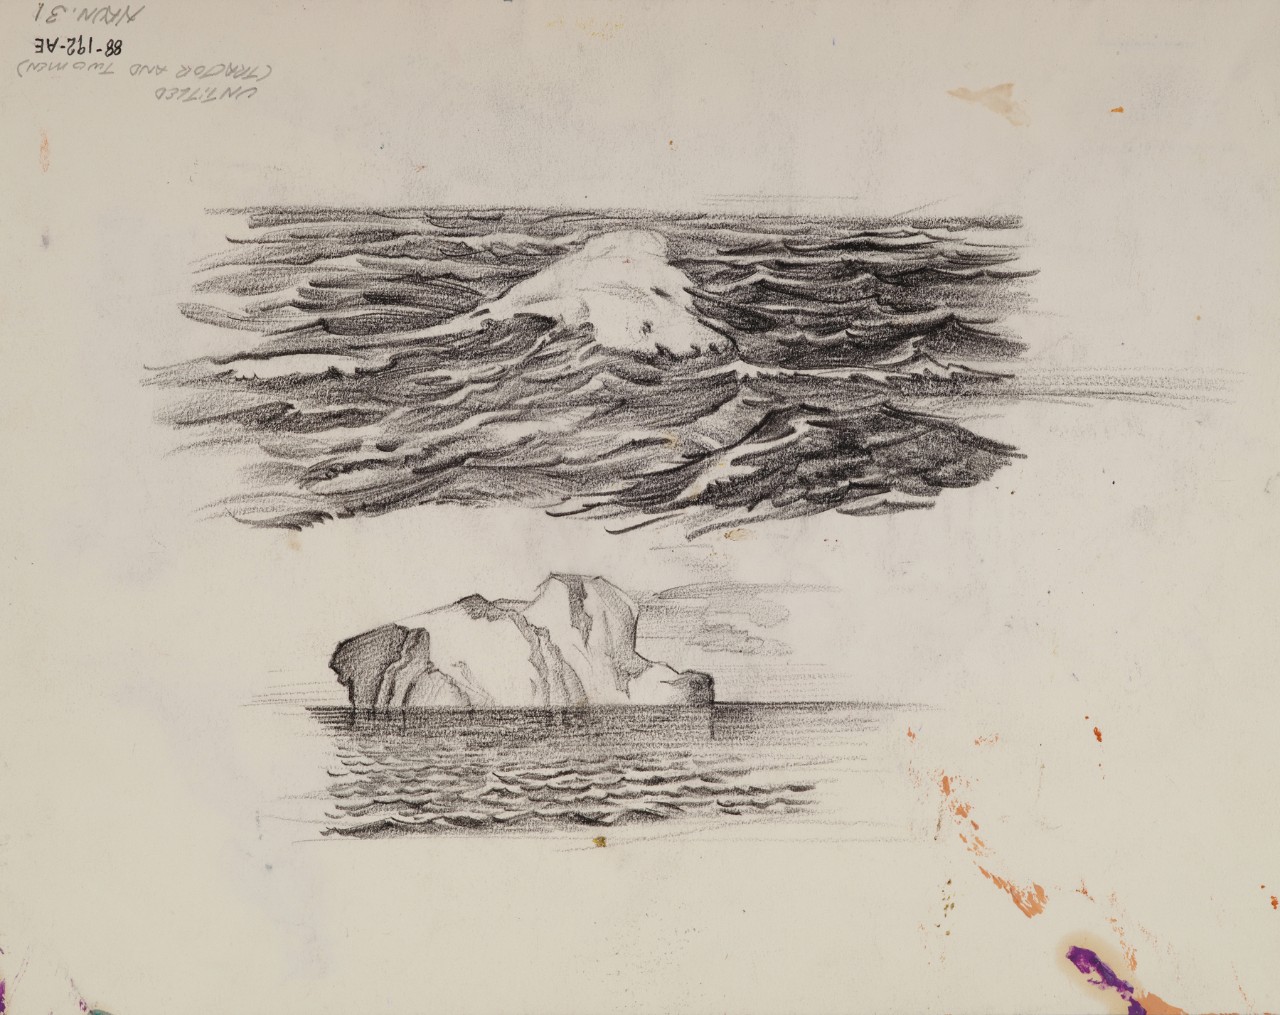 Two sketches of ice floating in the ocean